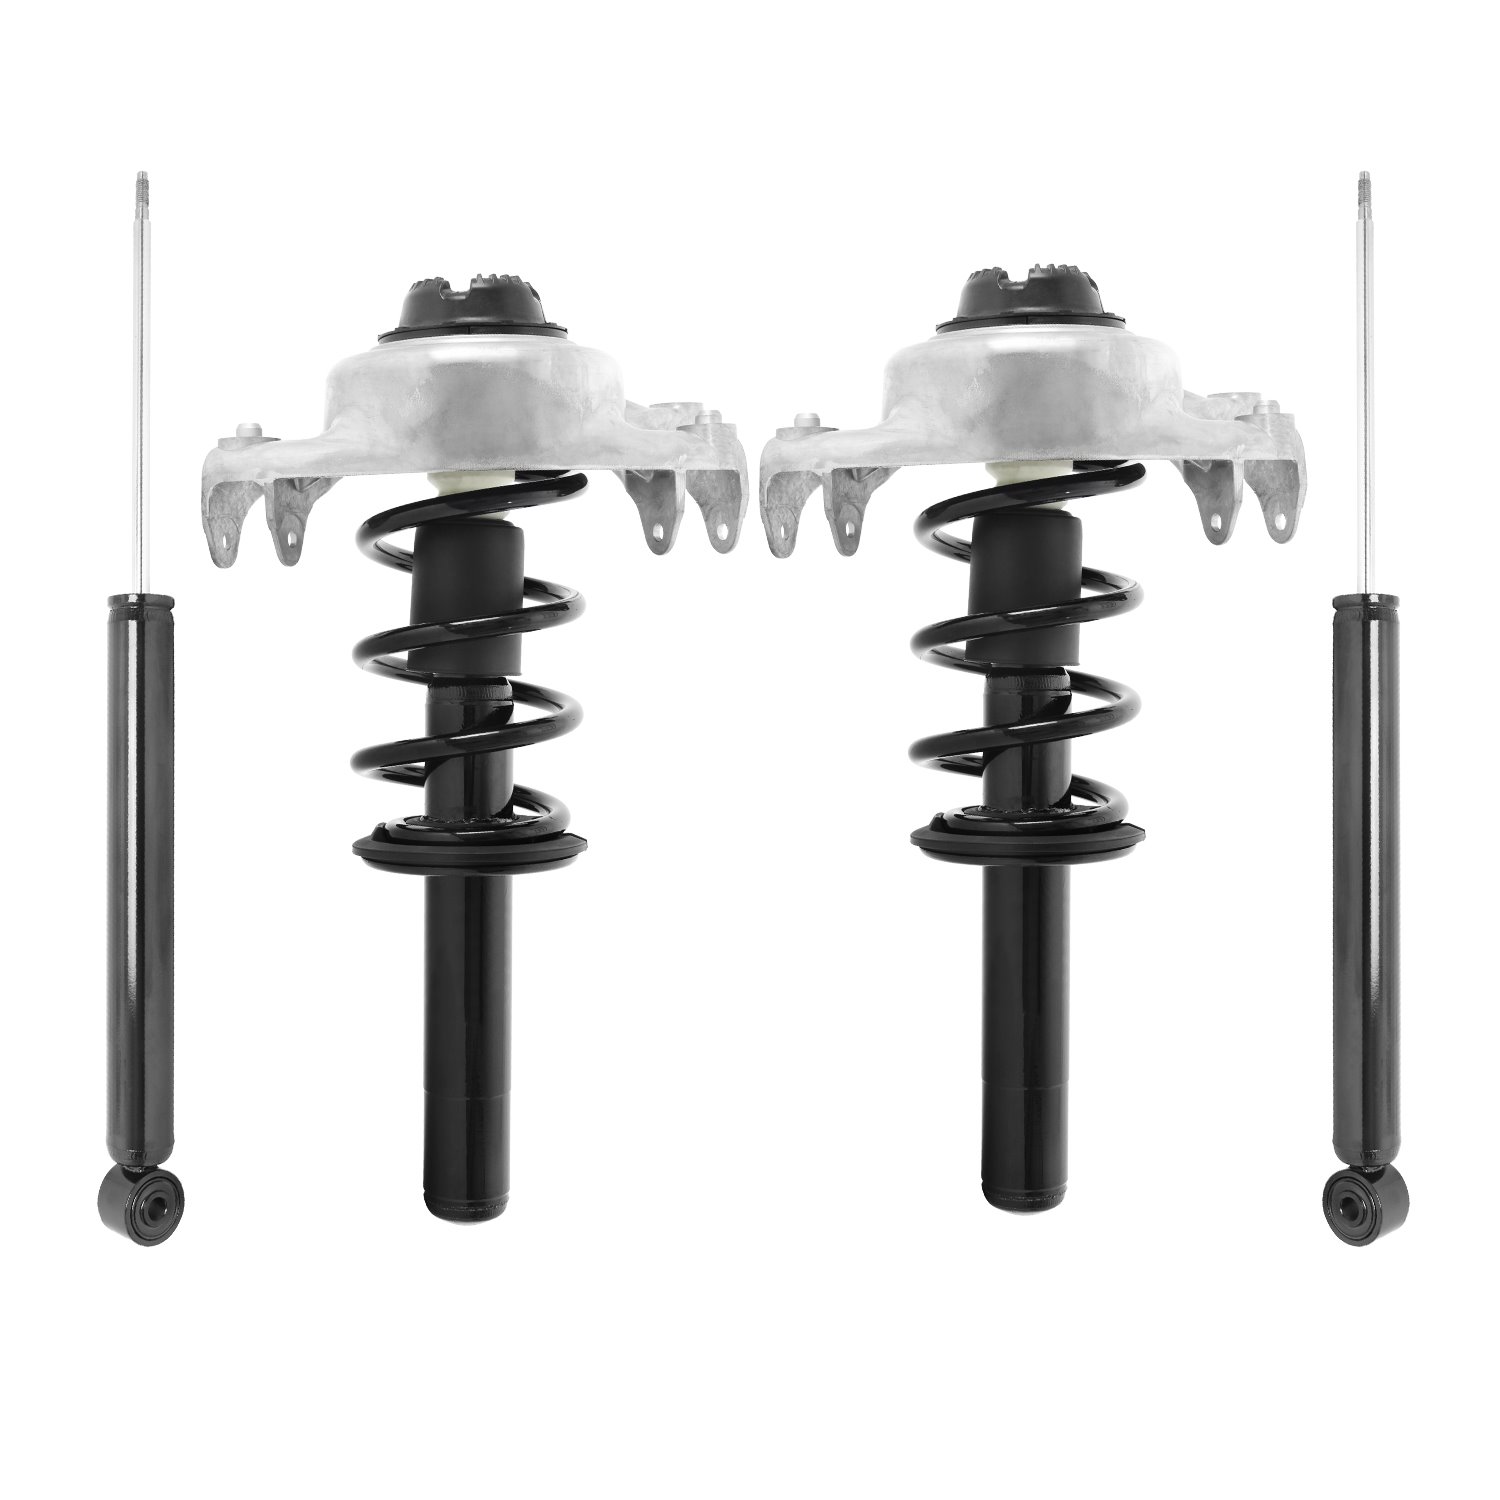 4-11098-257050-001 Front & Rear Suspension Strut & Coil Spring Assembly Fits Select Audi A4, Audi A4 Quattro